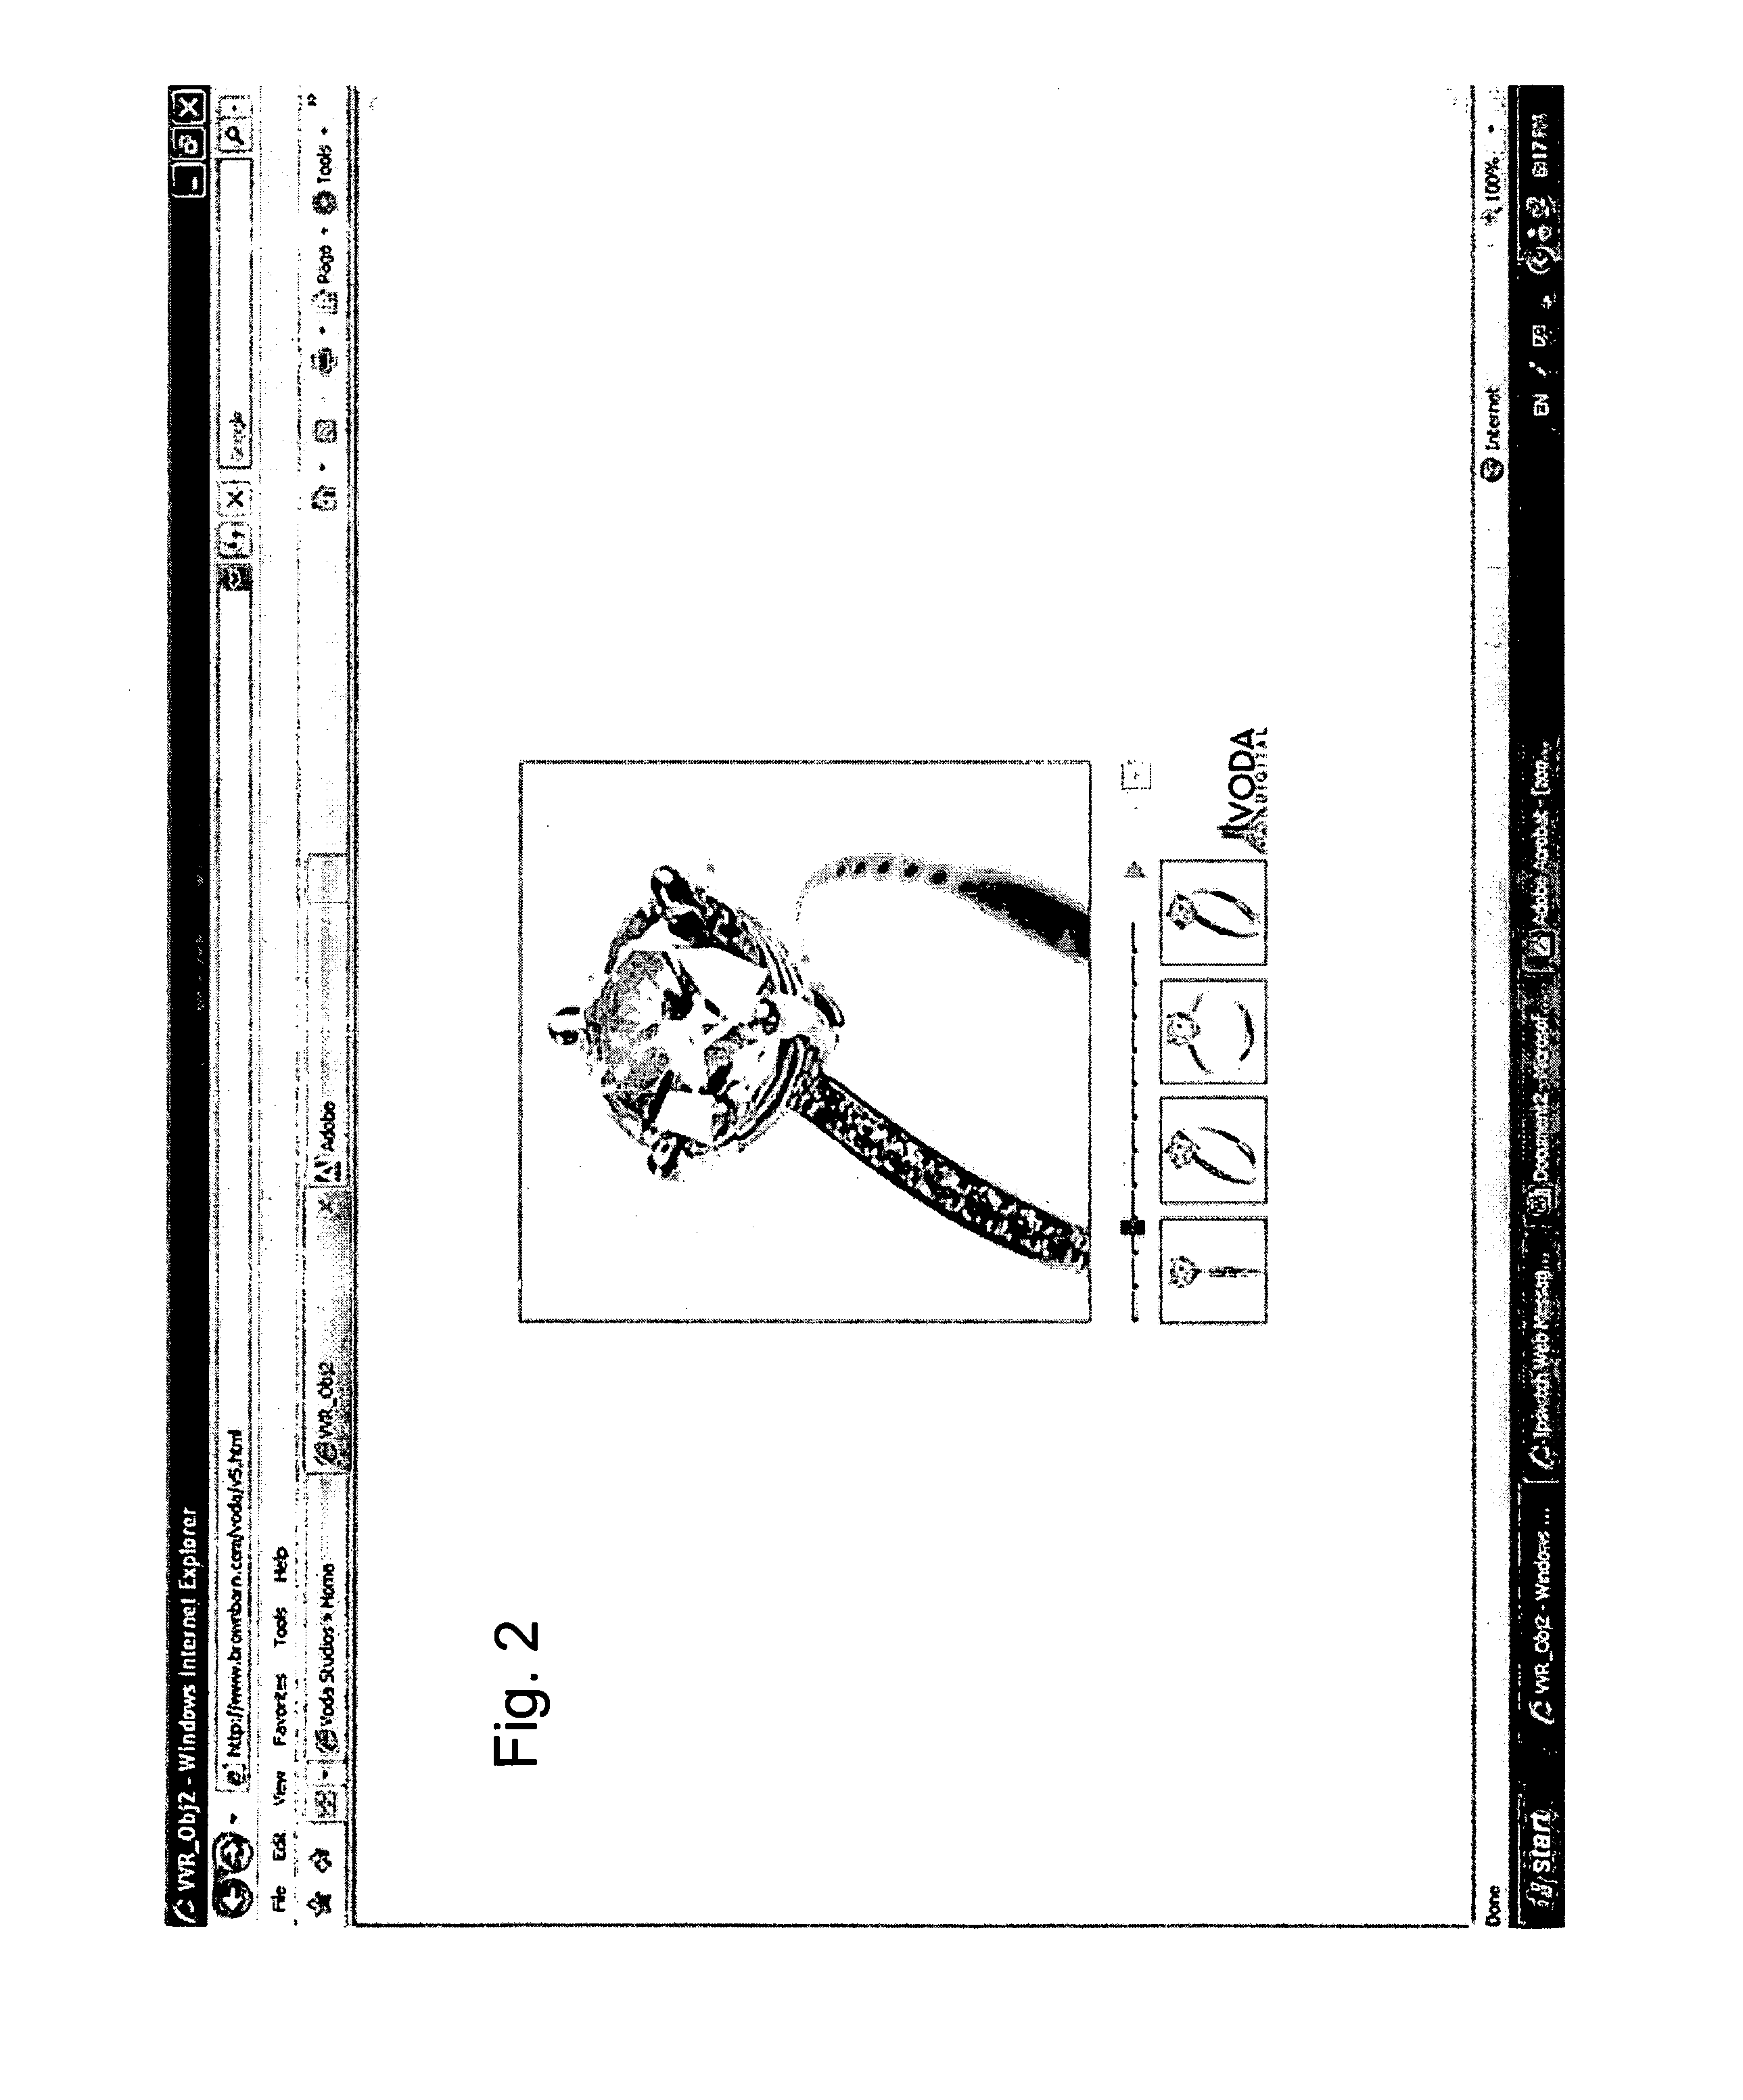 Apparatus and method for zoomable on-line video